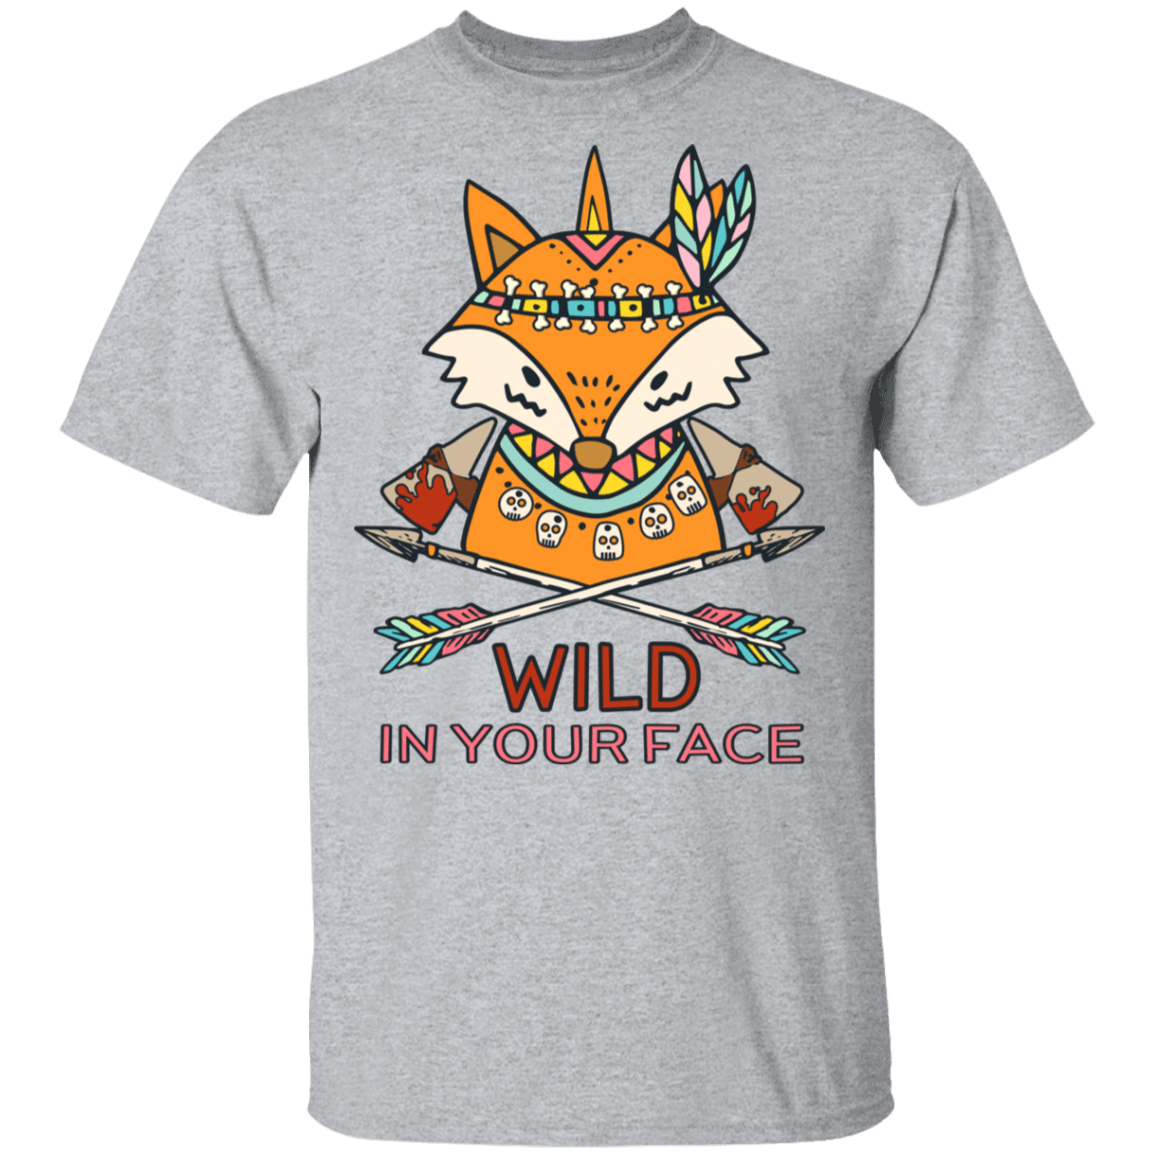 T-Shirts Sport Grey / S Wild In Your Face T-Shirt